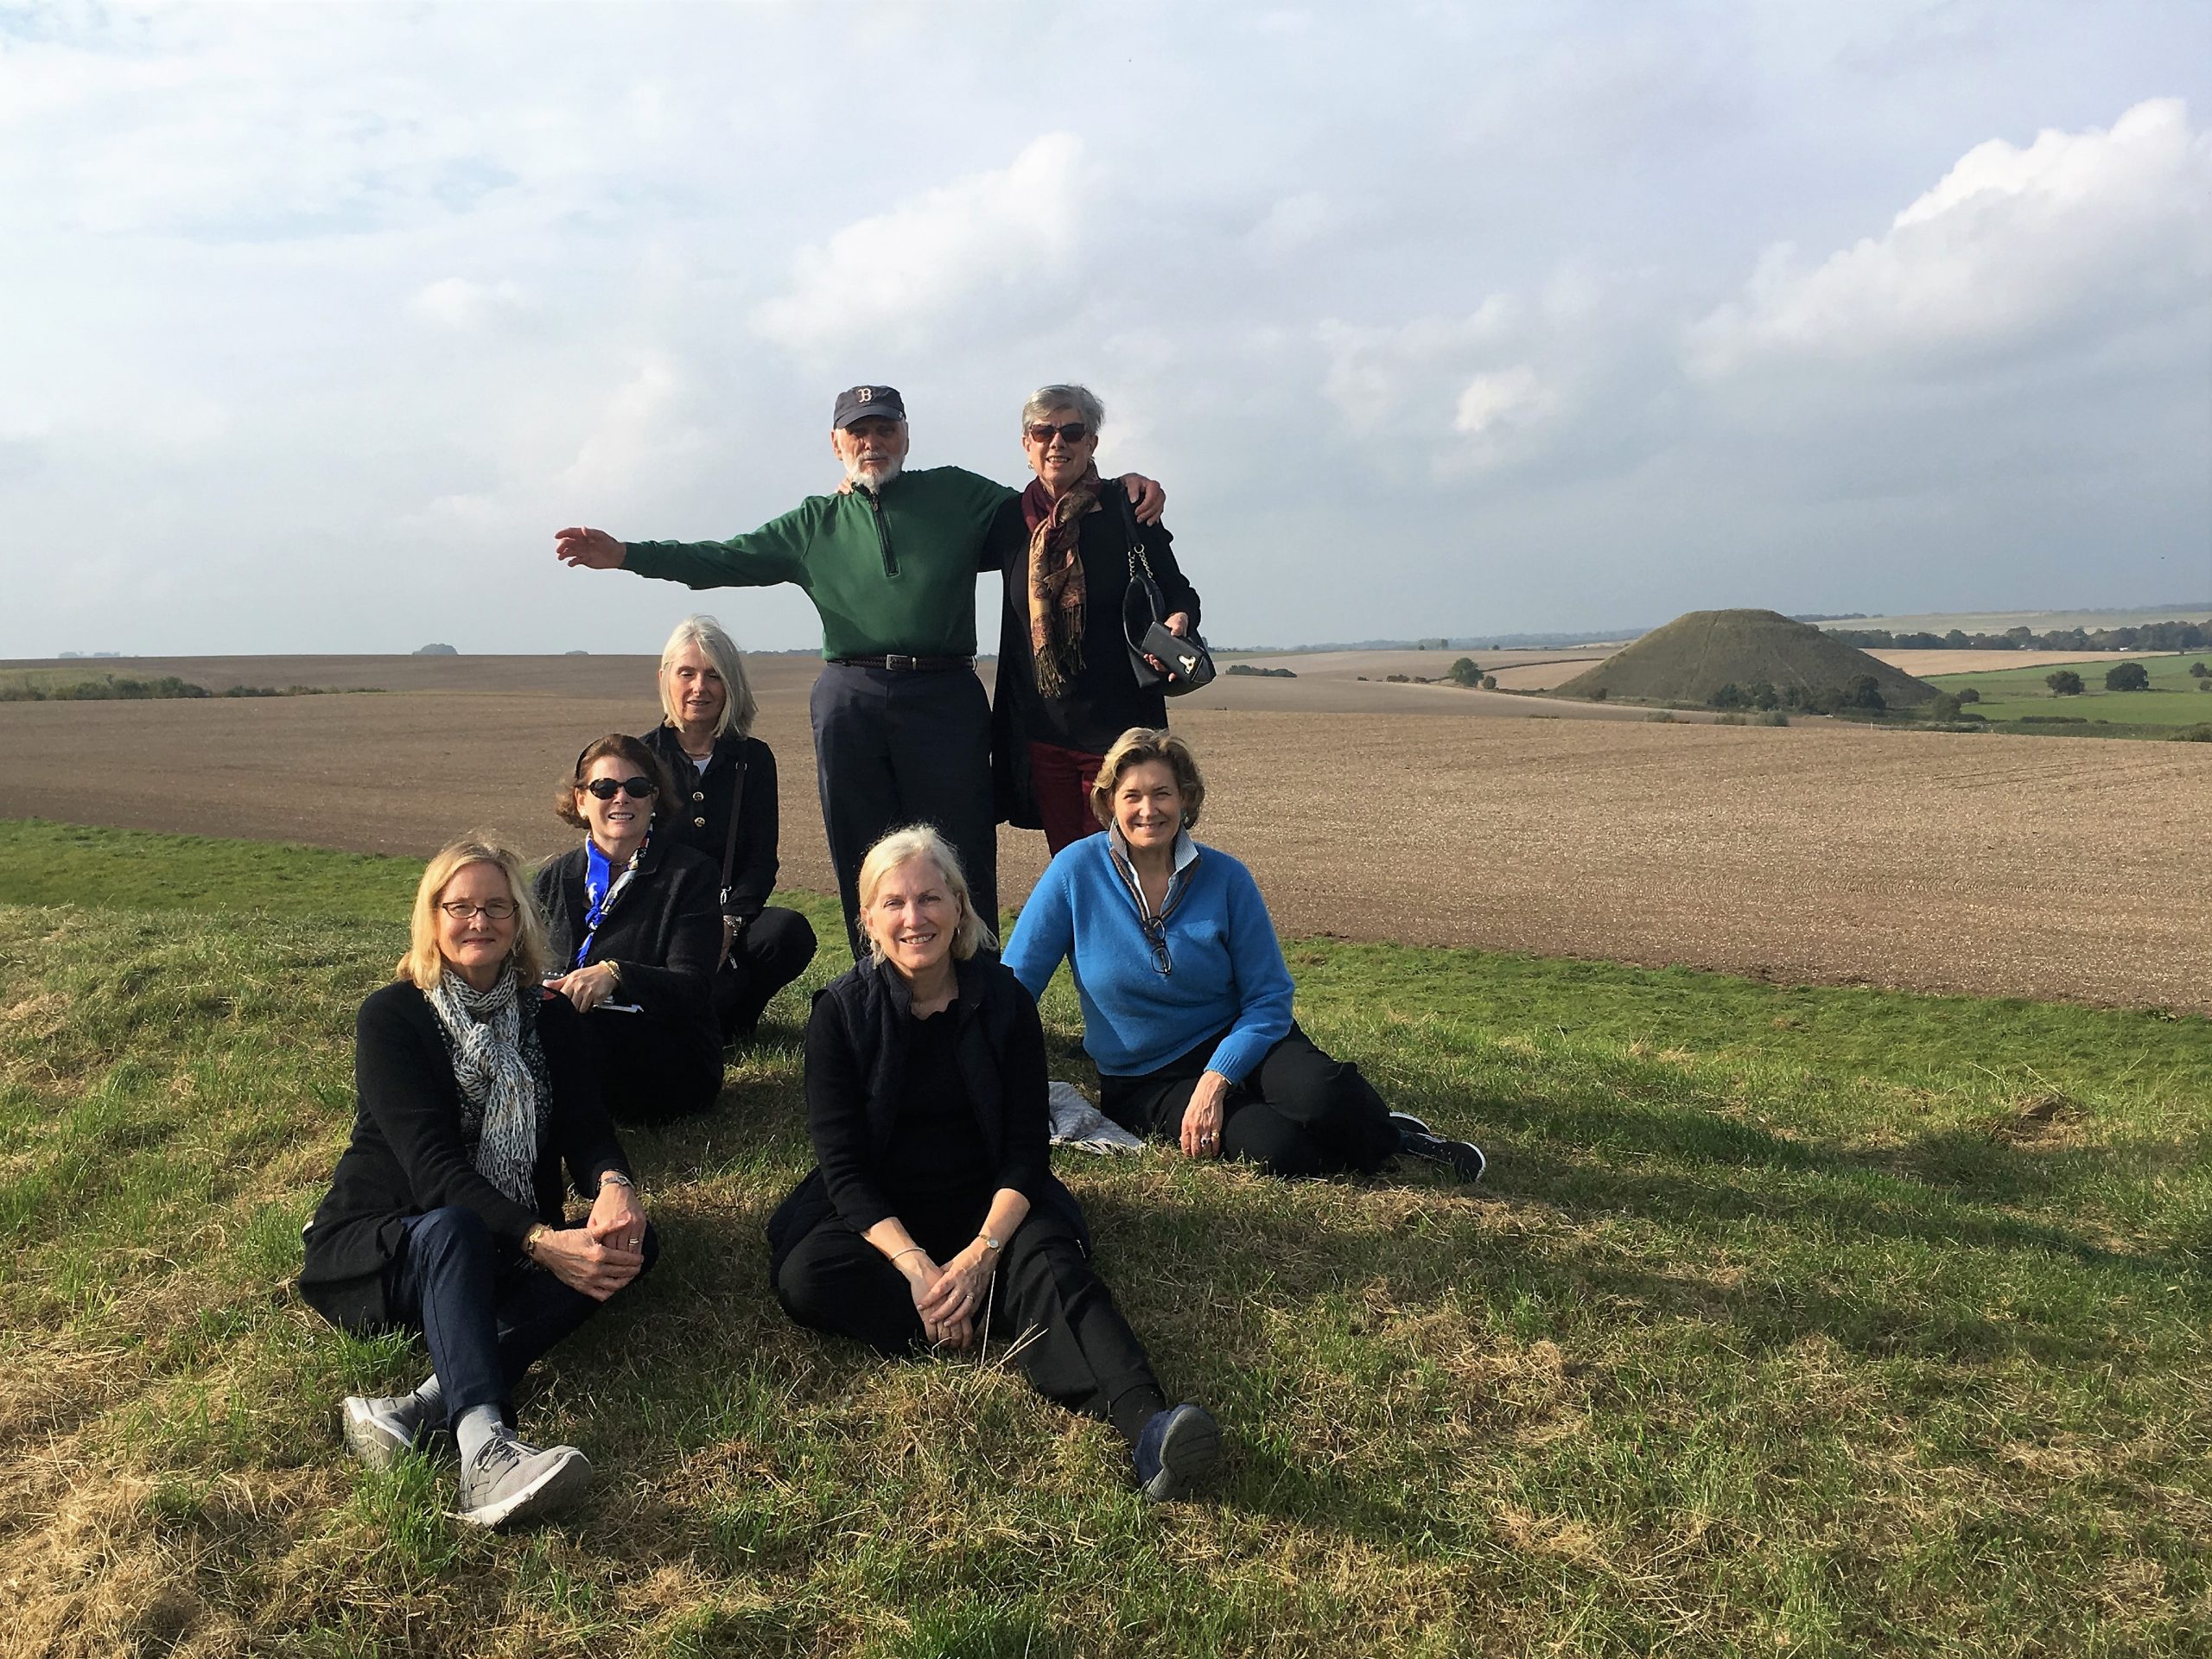 Private tour of Avebury area. On top of West Kennet Long Barrow with Silbury Hill in the background.